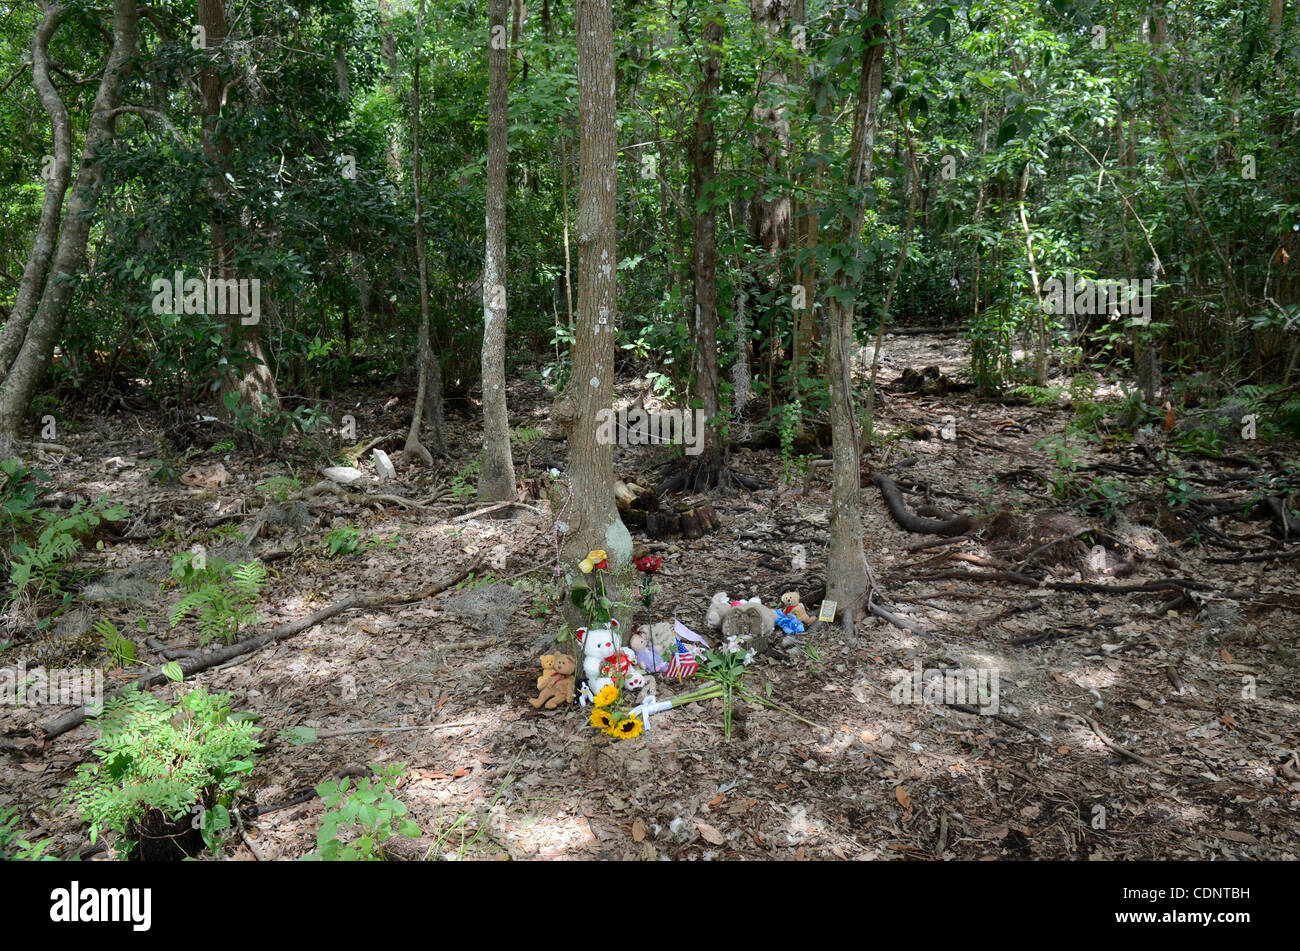 June 28, 2011 - Orlando, Florida, U.S. - Stuffed animals, flowers and other  items sit at a makeshift memorial in the area where the body of  two-year-old Caylee Anthony was found in